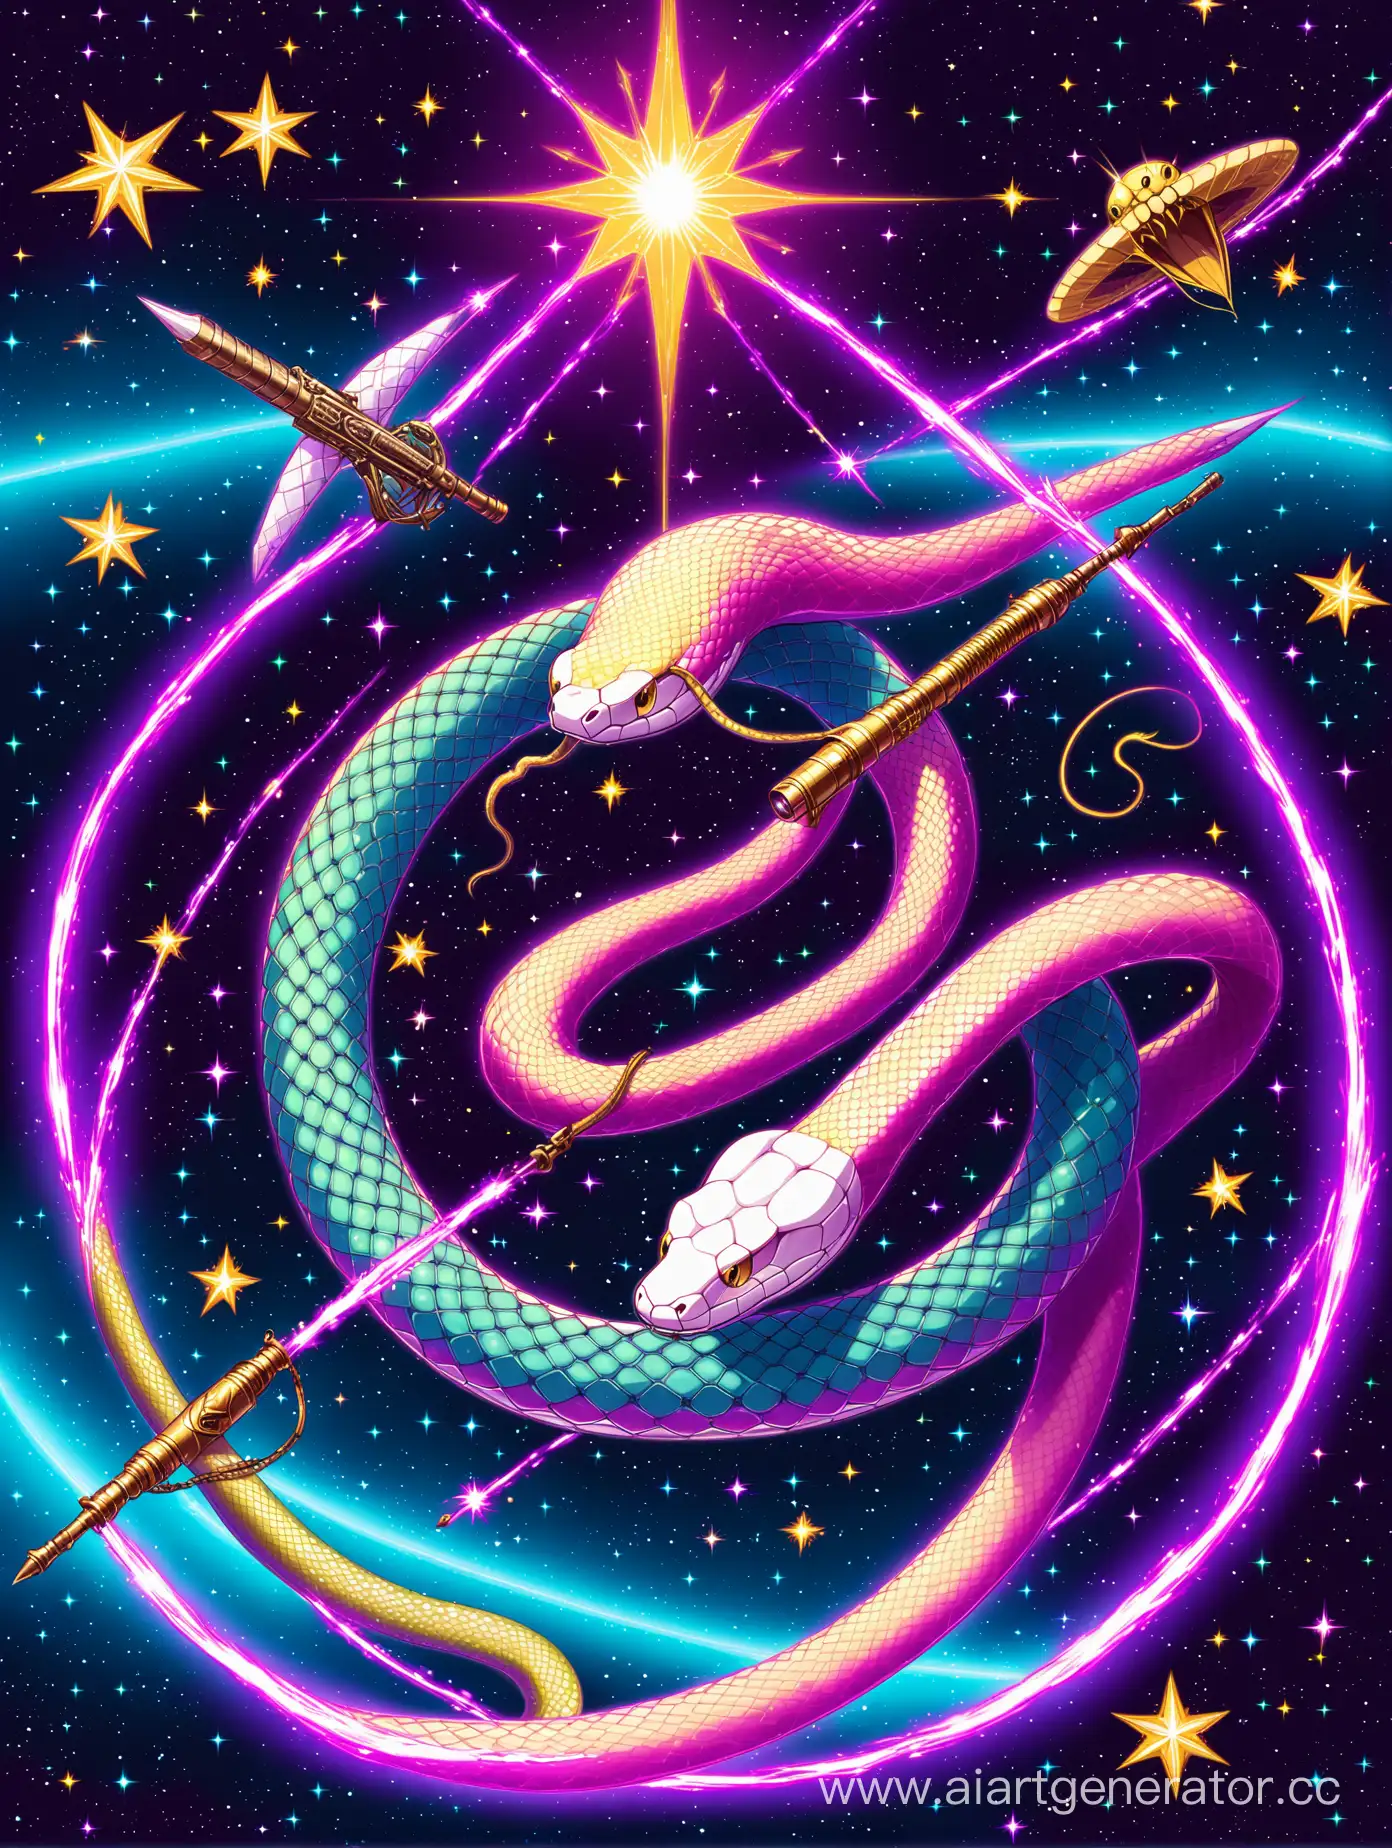 Cosmic-Serpent-Warrior-with-Unusual-Weapon-in-Starry-Abyss